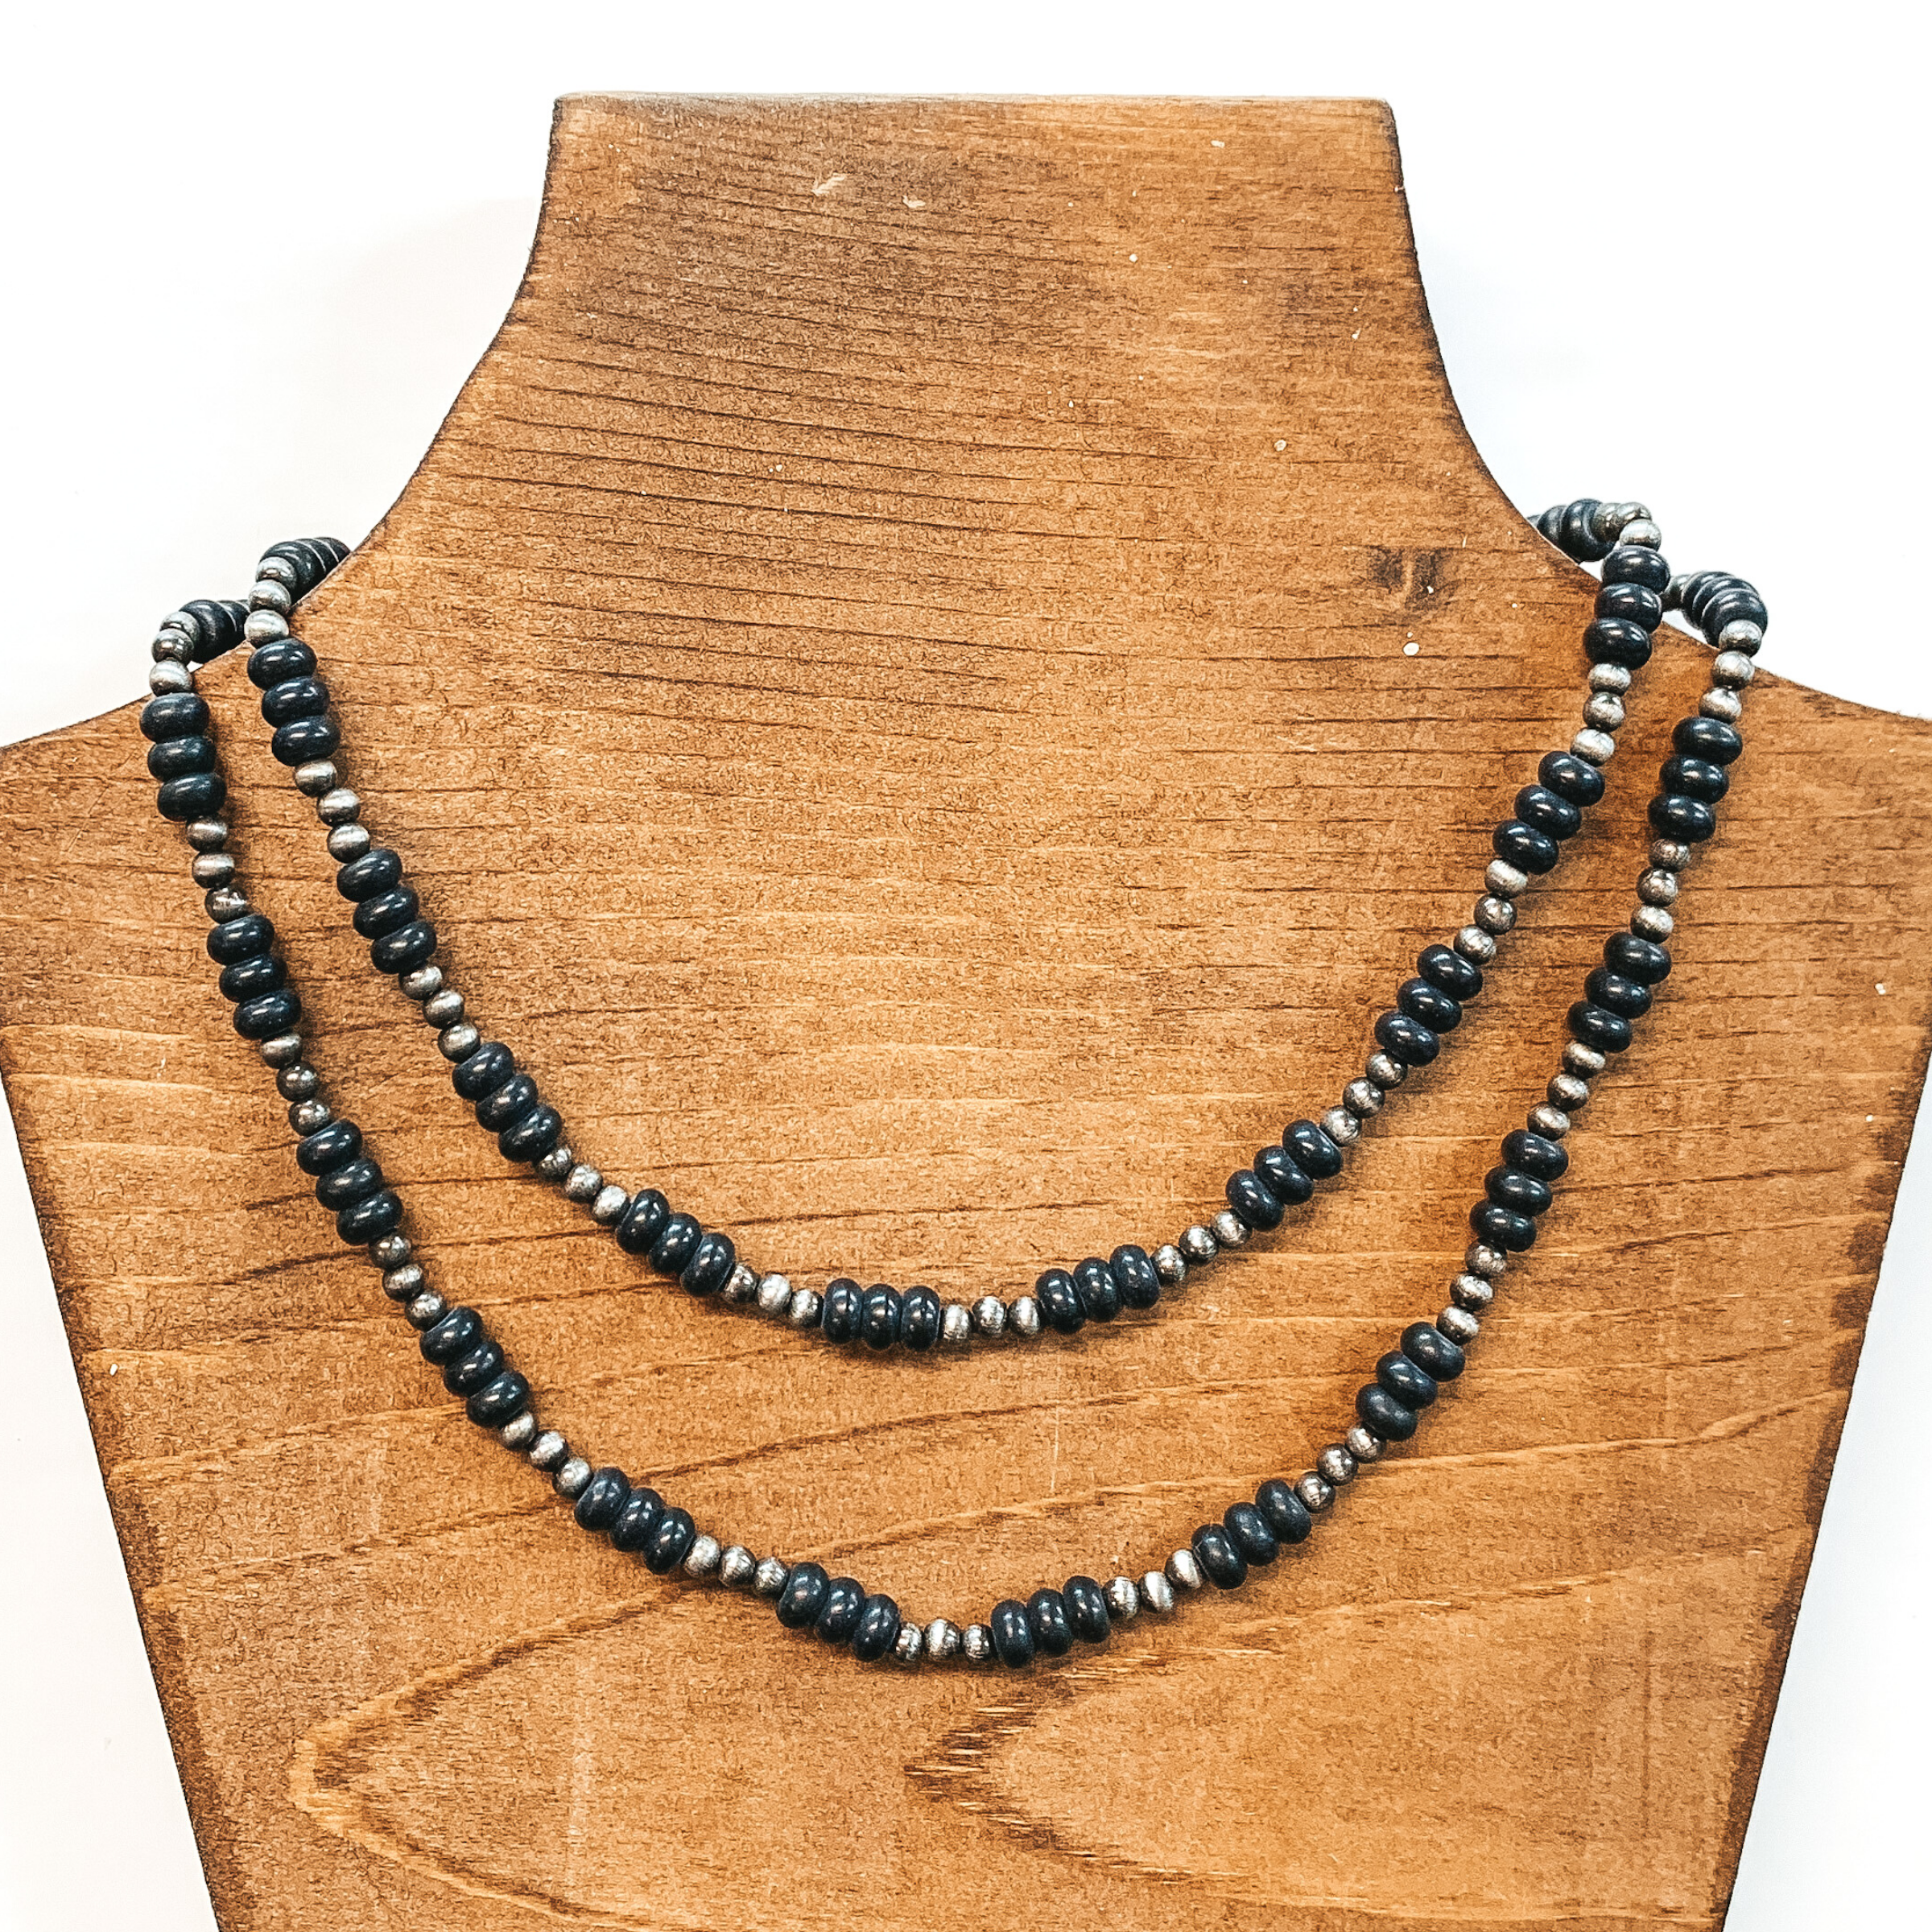 Two strand necklace that includes silver bead segments with bigger, black bead segments. This necklace is pictured on a brown necklace holder on a white background.